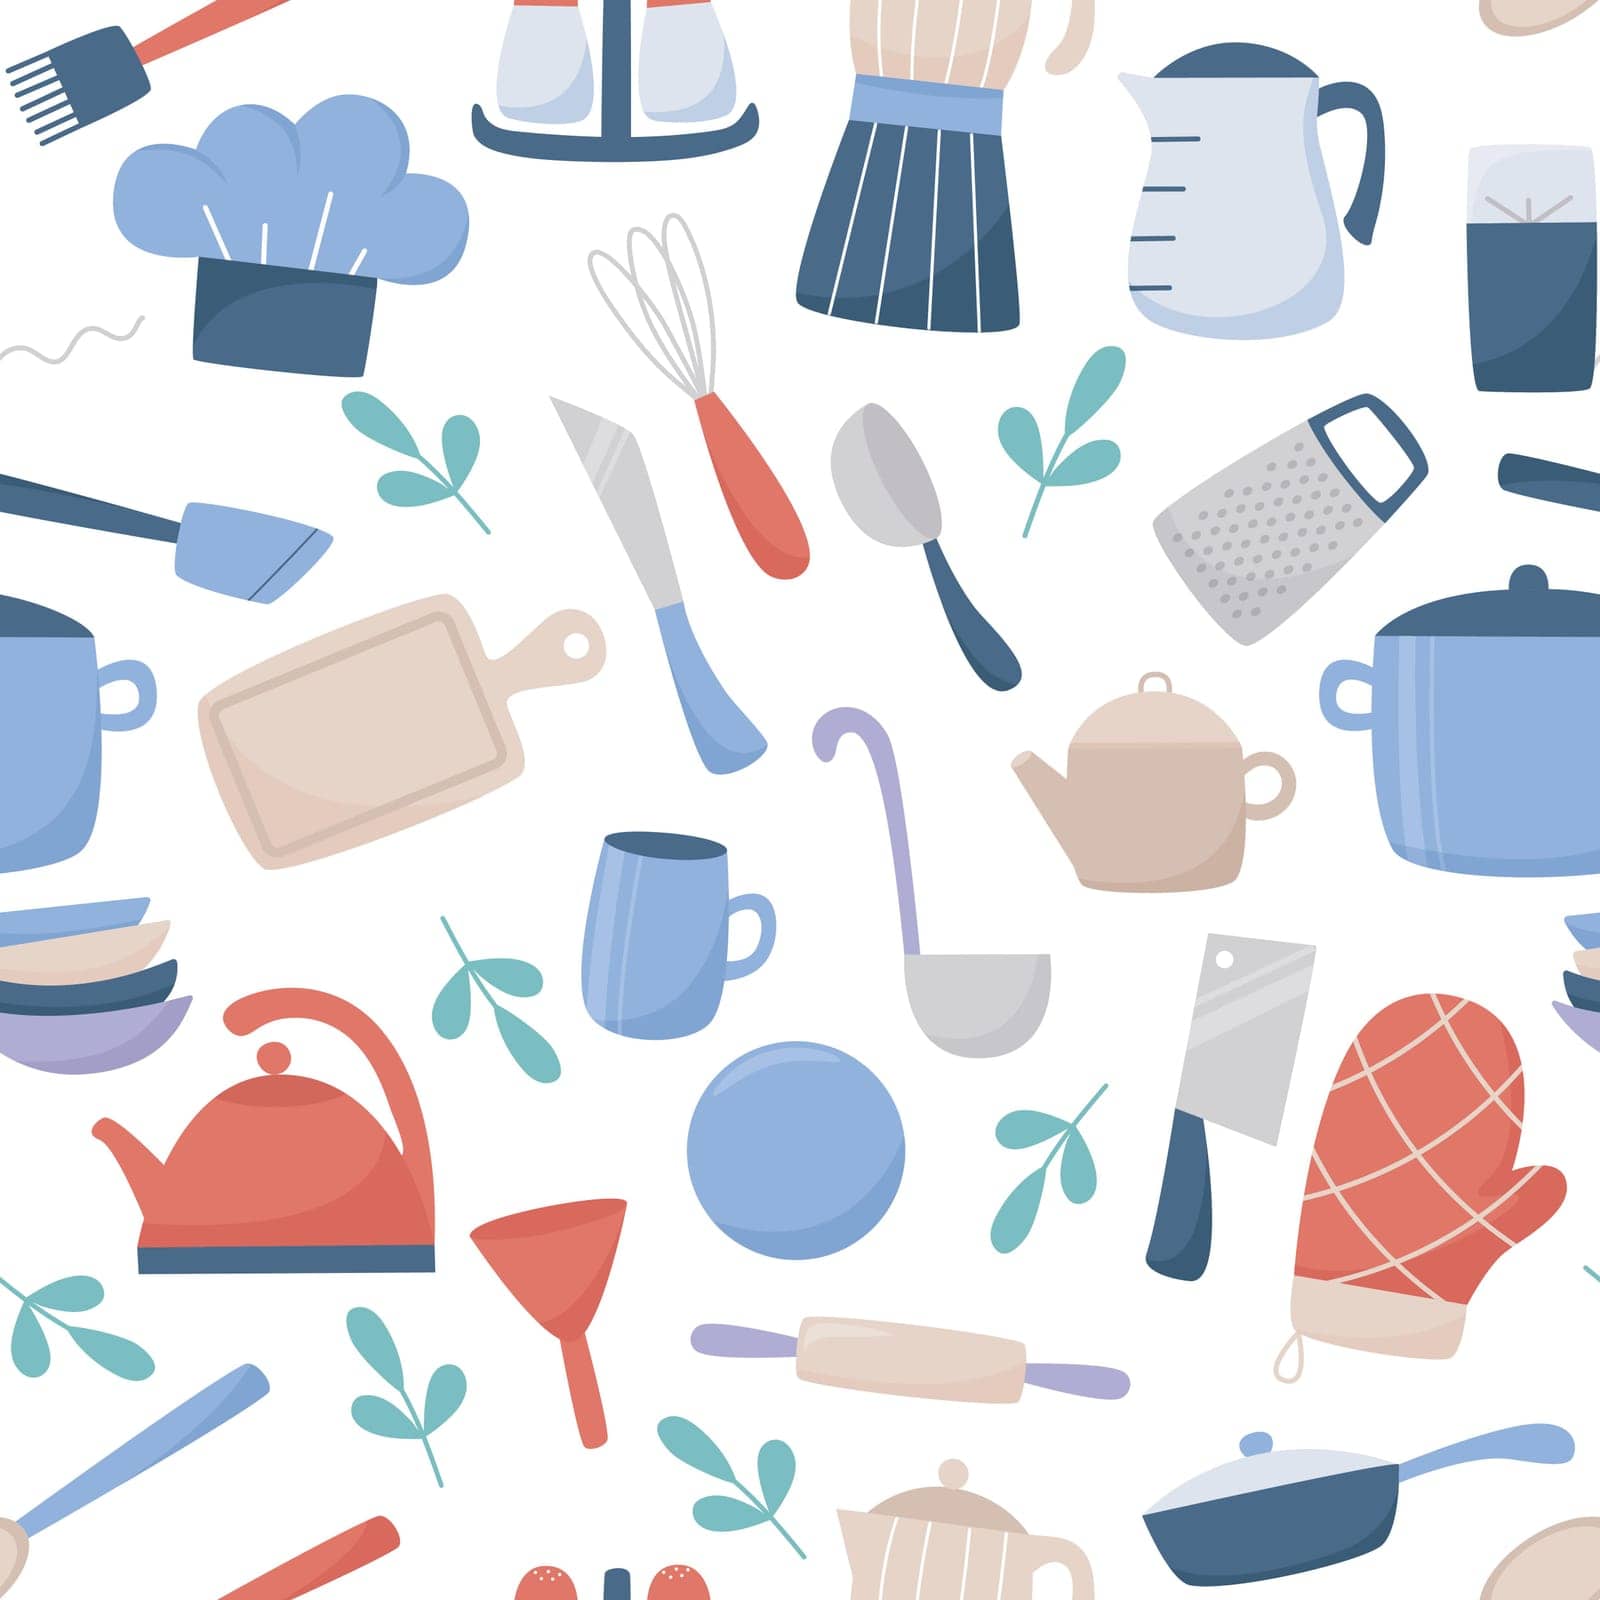 Kitchenware and utensils seamless pattern. Cooking items background. Crockery, cutlery, electrical appliances for cooking print, flat style vector illustration